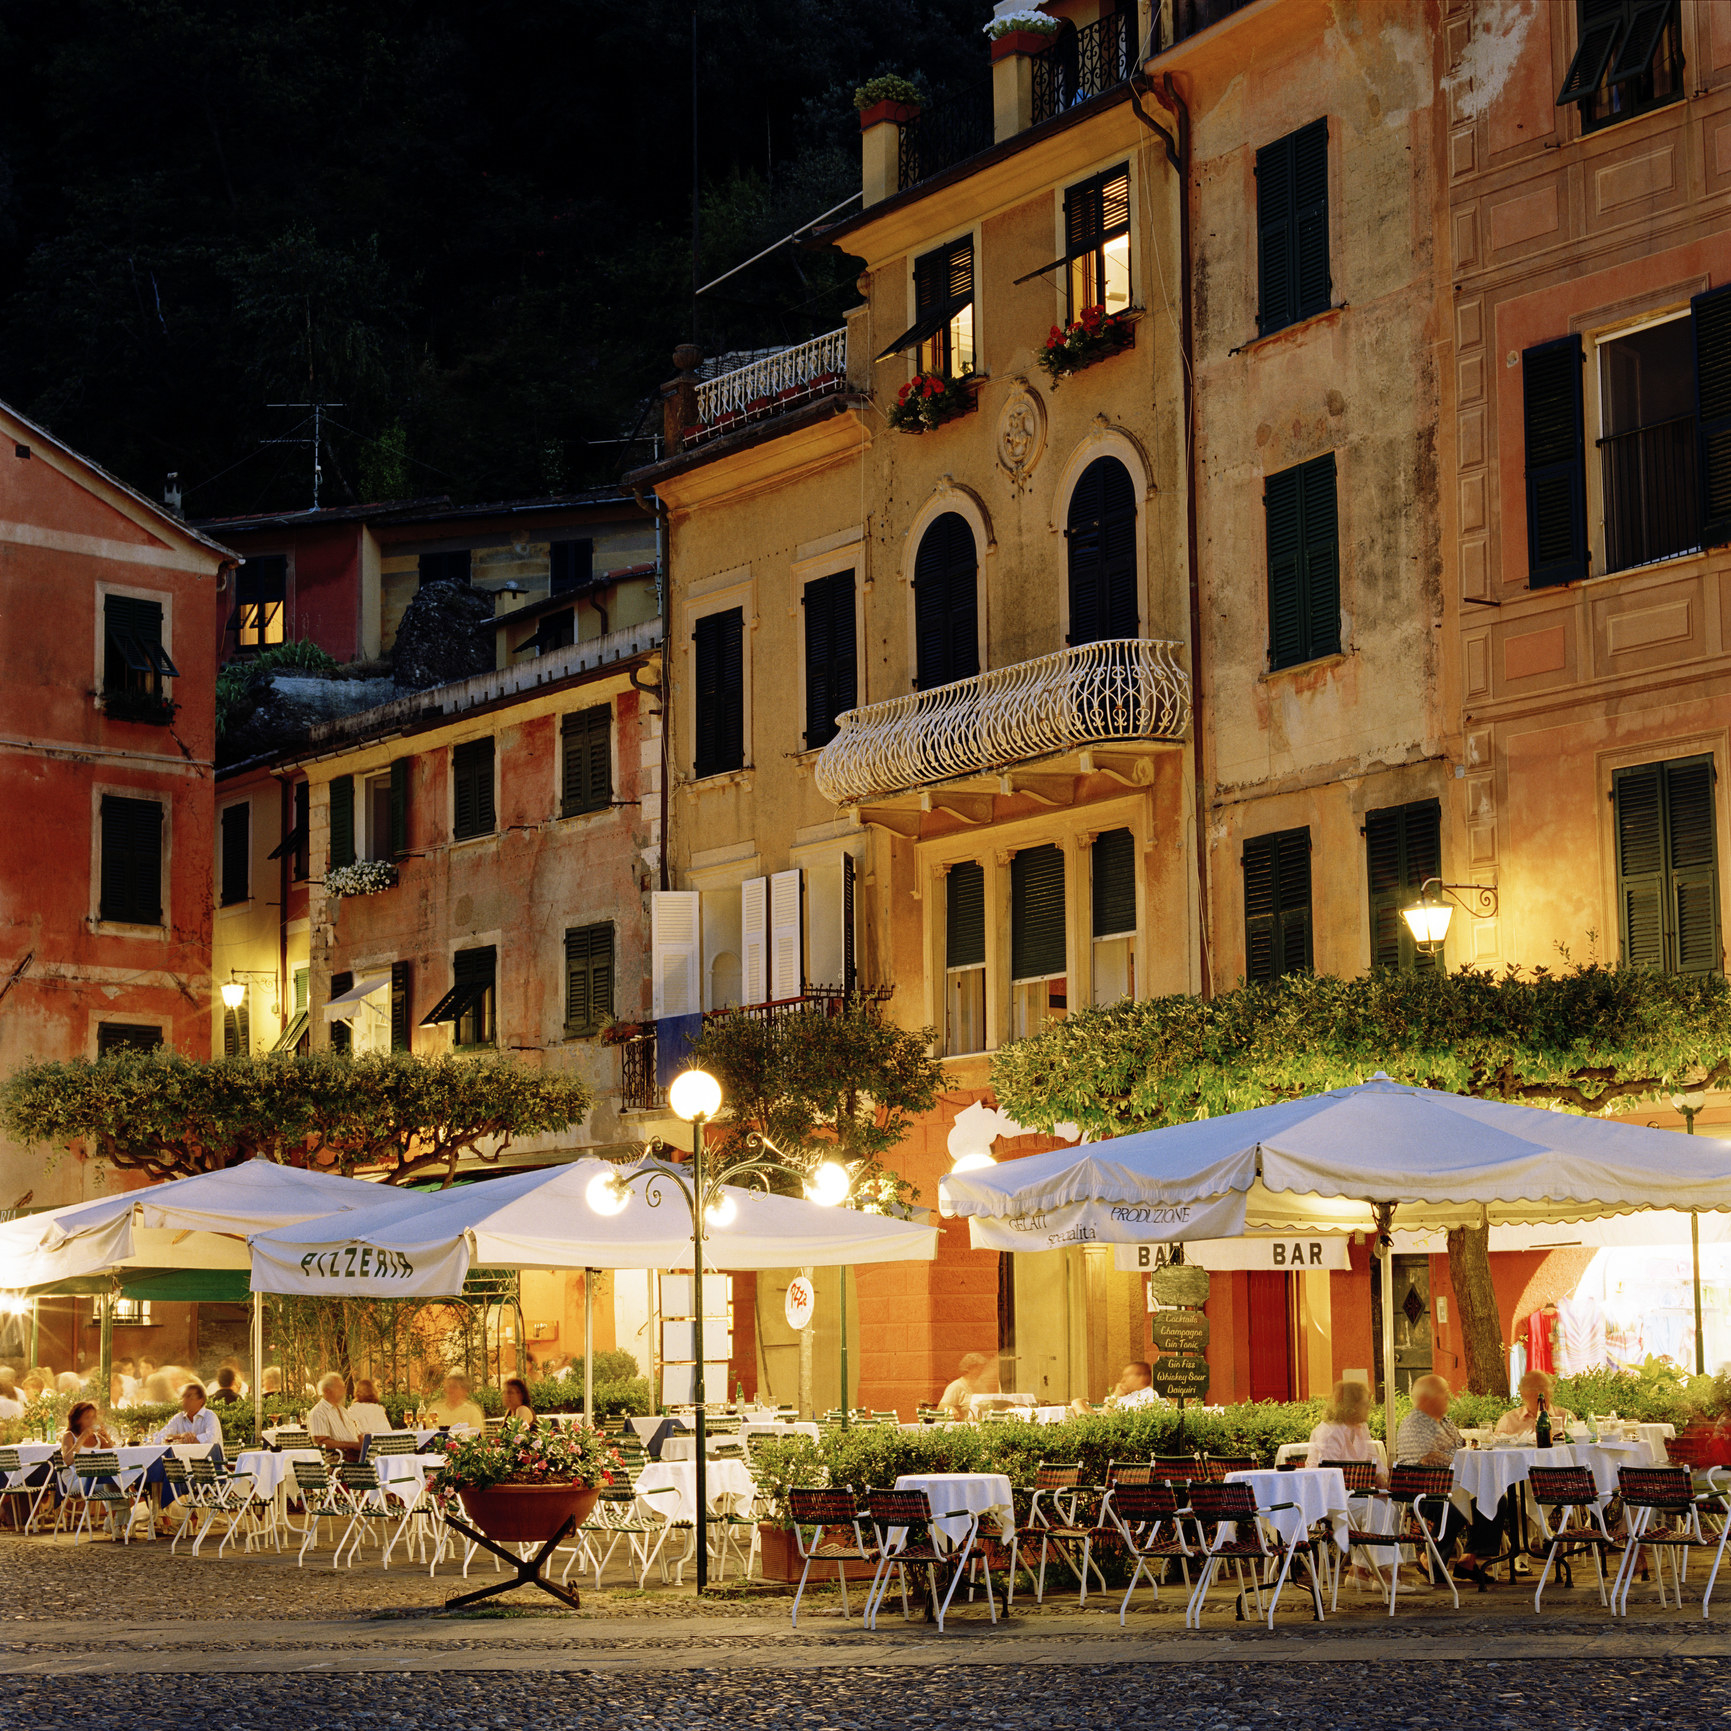 People dining outside in a piazza at night.